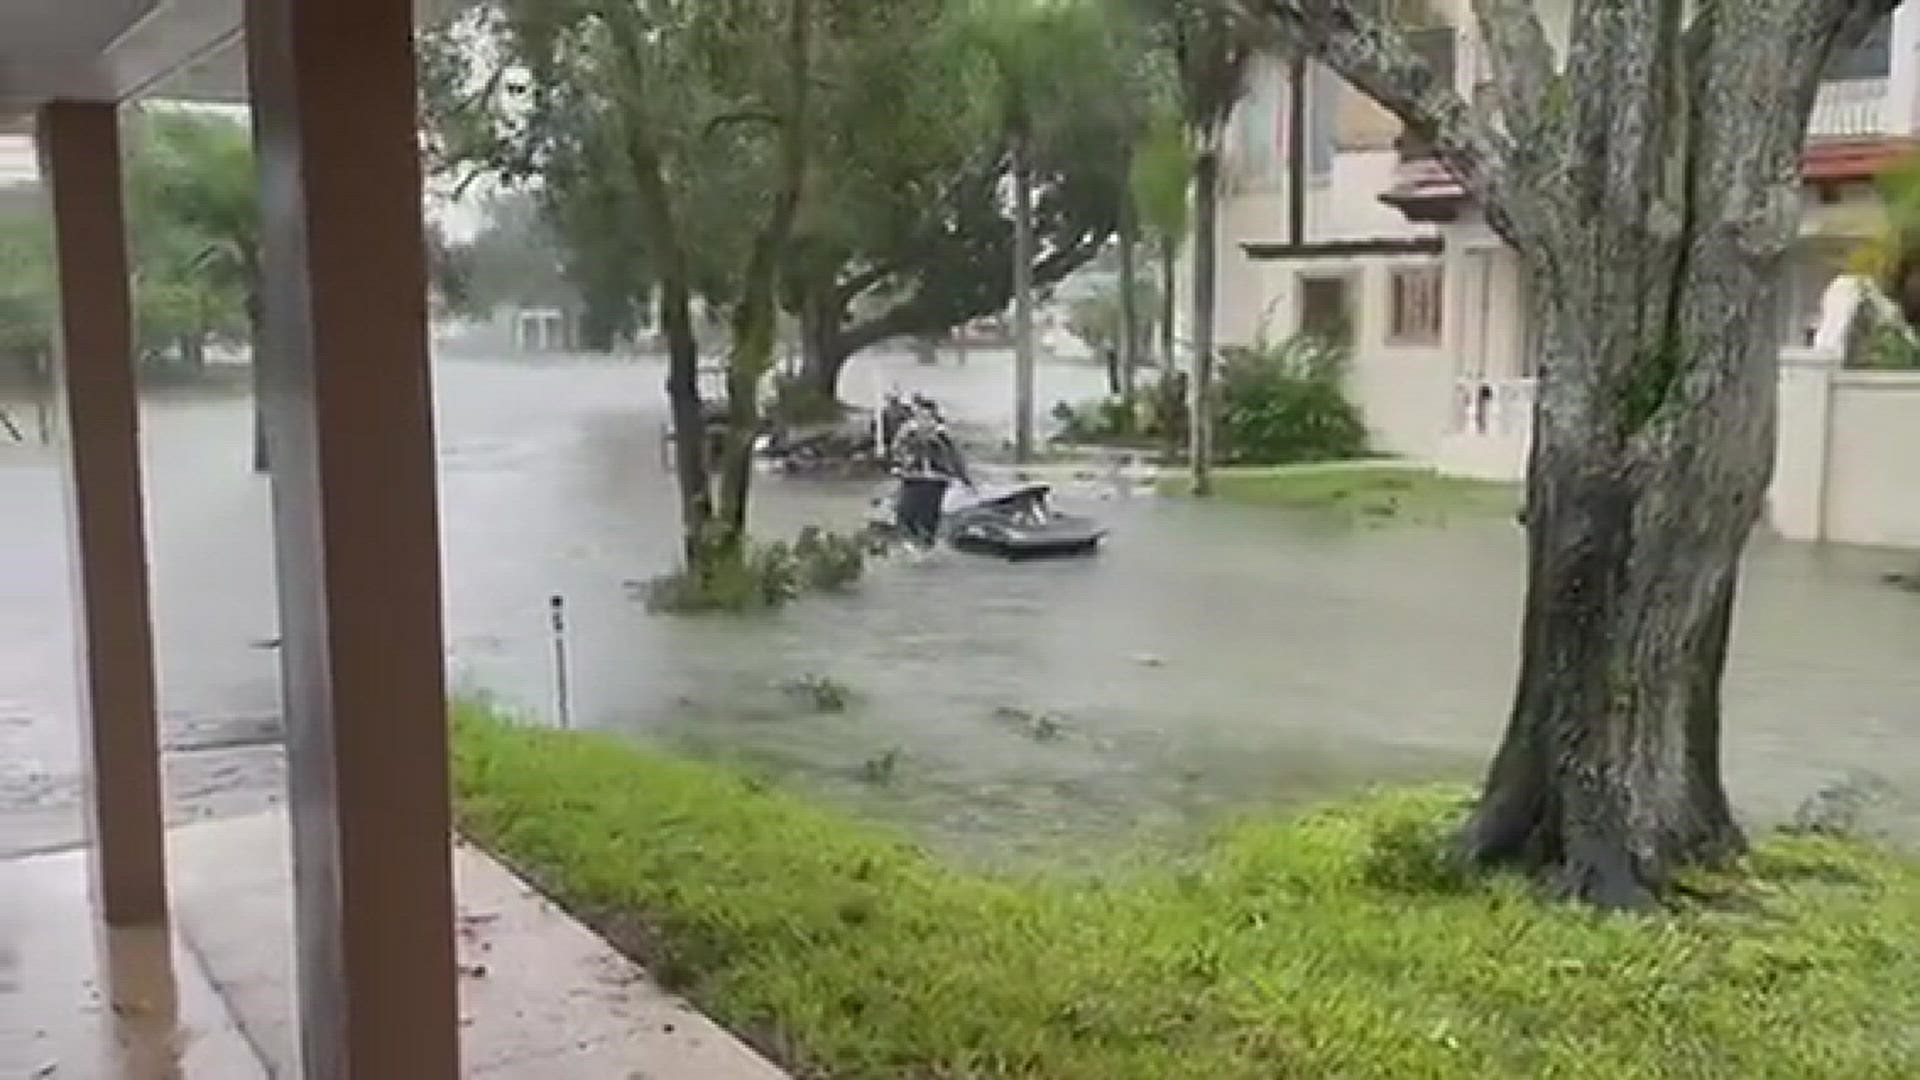 St. Augustine man jet skiing in his side yard in Davis Shores after Ian
Credit: Trey DuPont